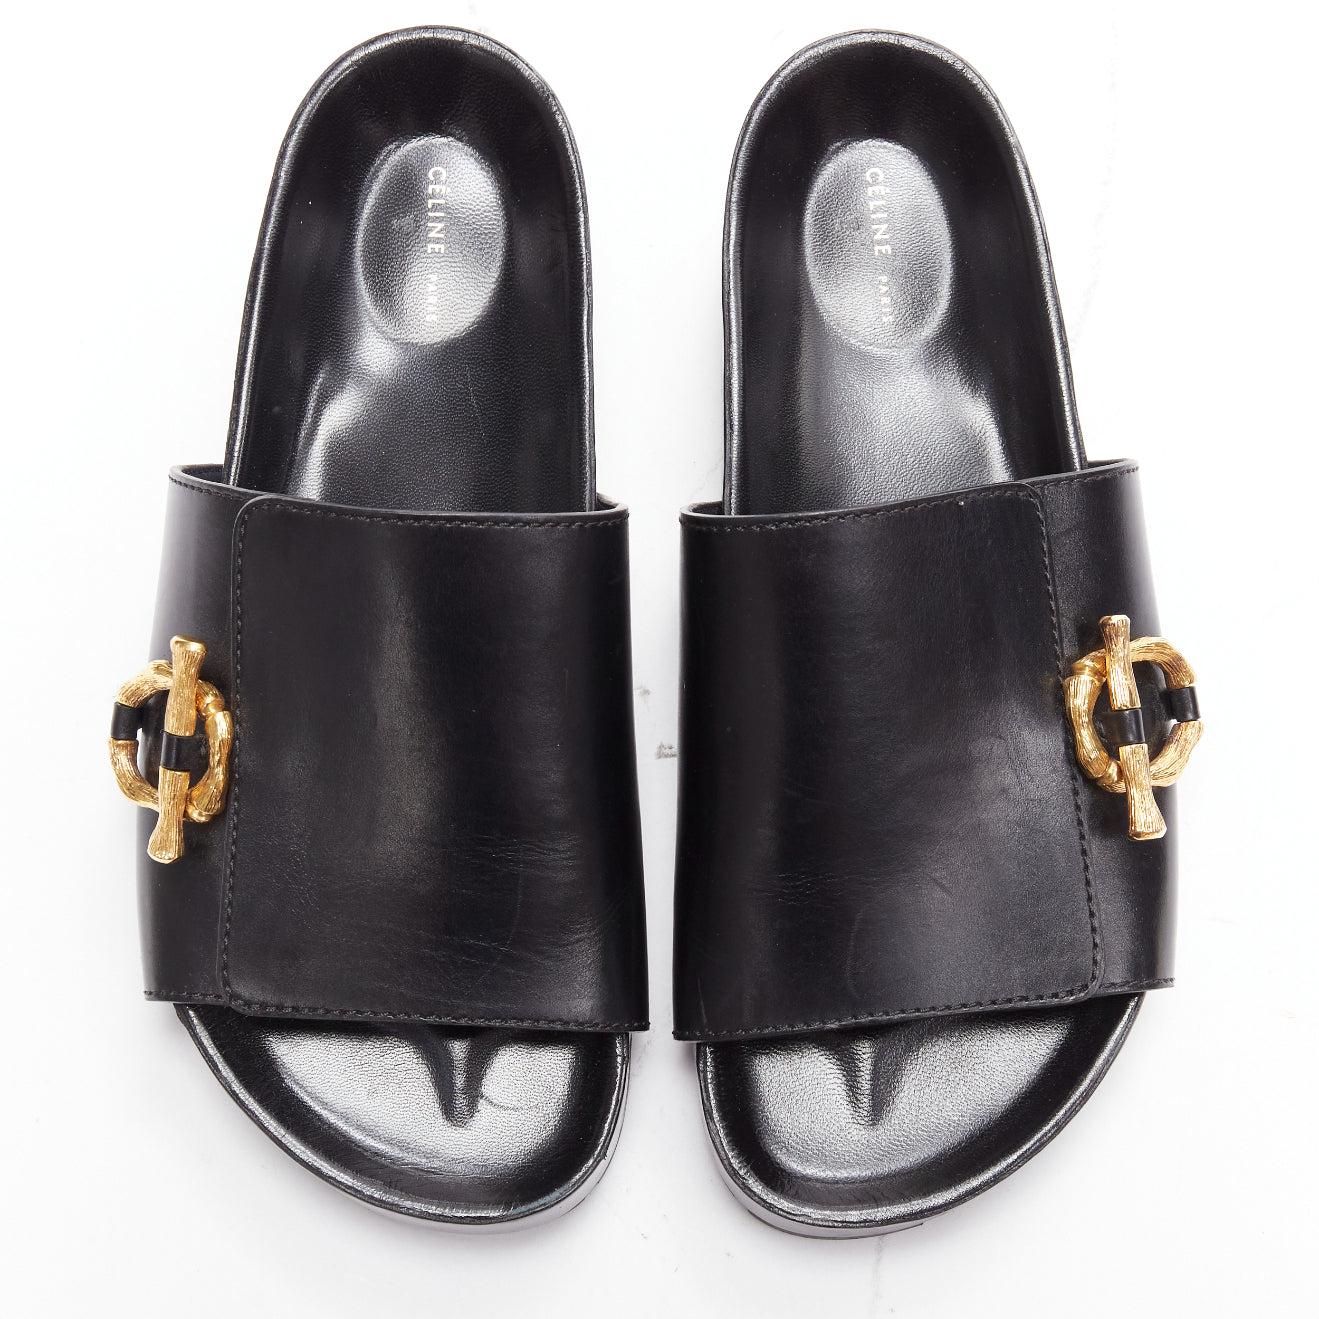 new OLD CELINE Phoebe Philo gold bamboo buckle black leather sandals EU38
Reference: TGAS/D00739
Brand: Celine
Designer: Phoebe Philo
Material: Leather
Color: Black, Gold
Pattern: Solid
Closure: Slip On
Lining: Black Leather
Made in: